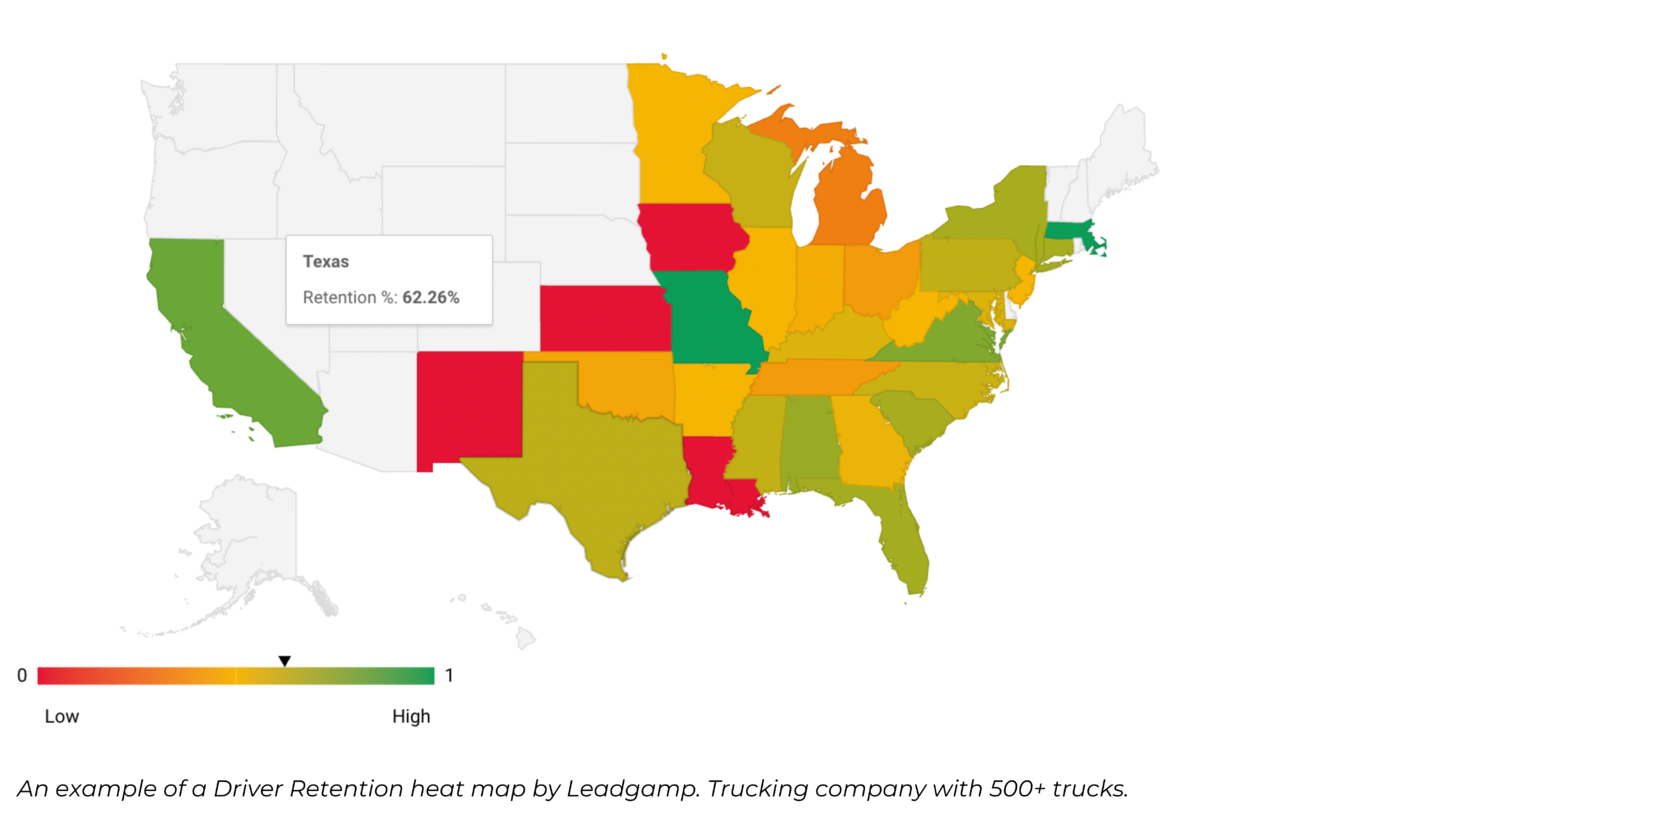 Truck driver turnover rate